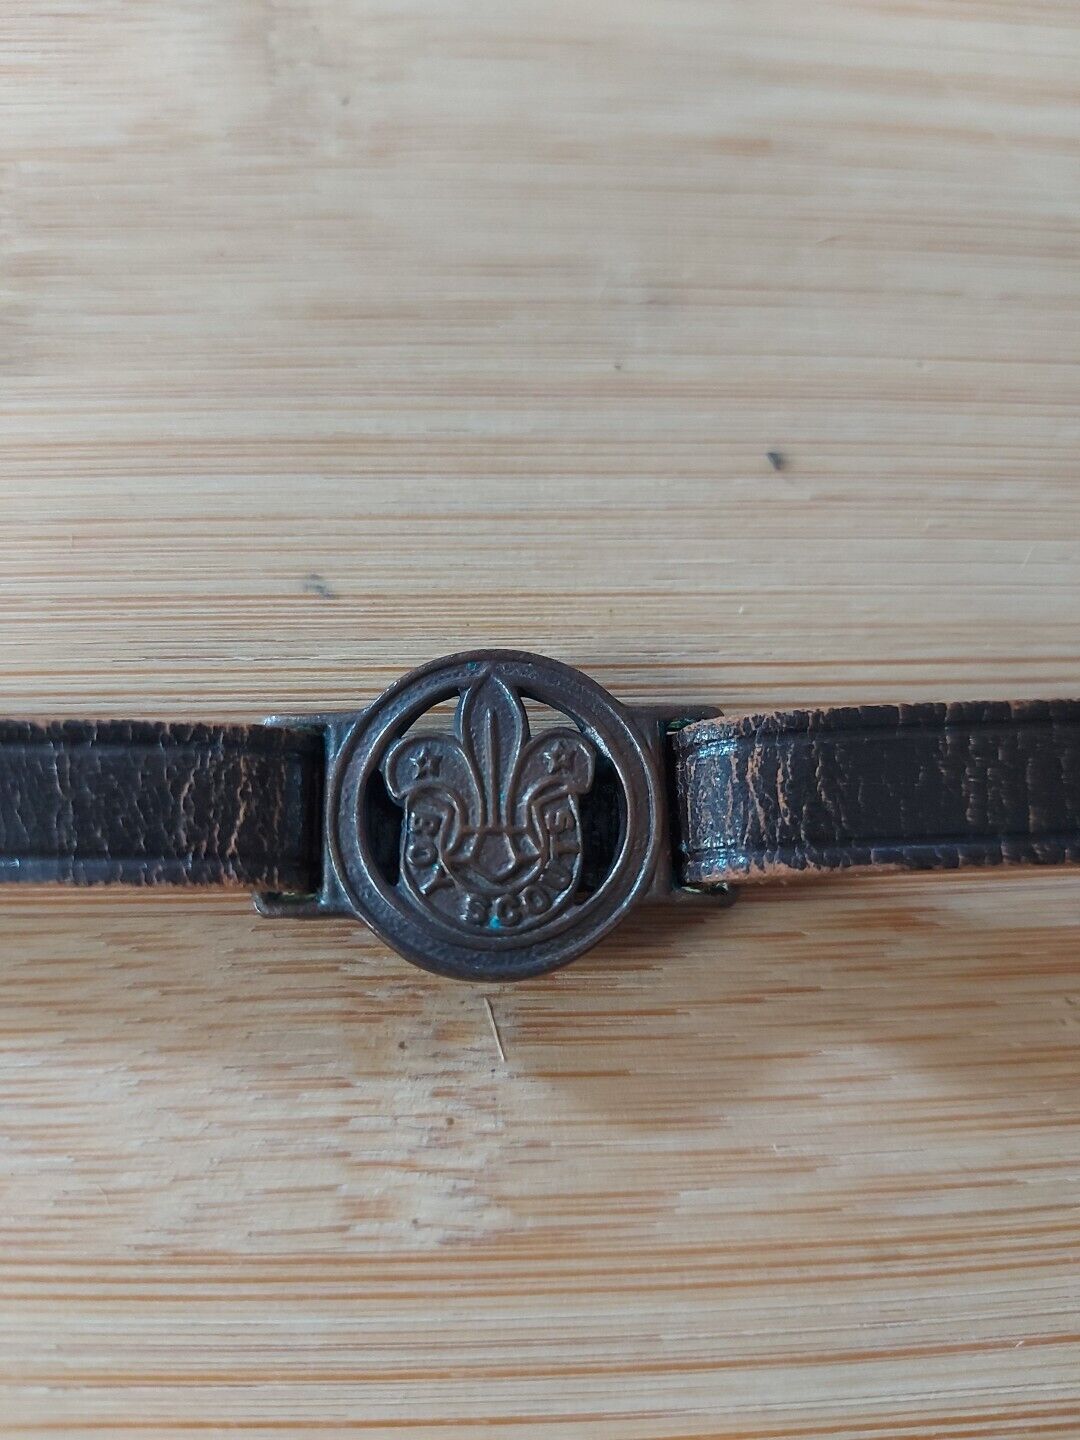 UK Scouting Boy Scout Forces Wrist Badge and Strap